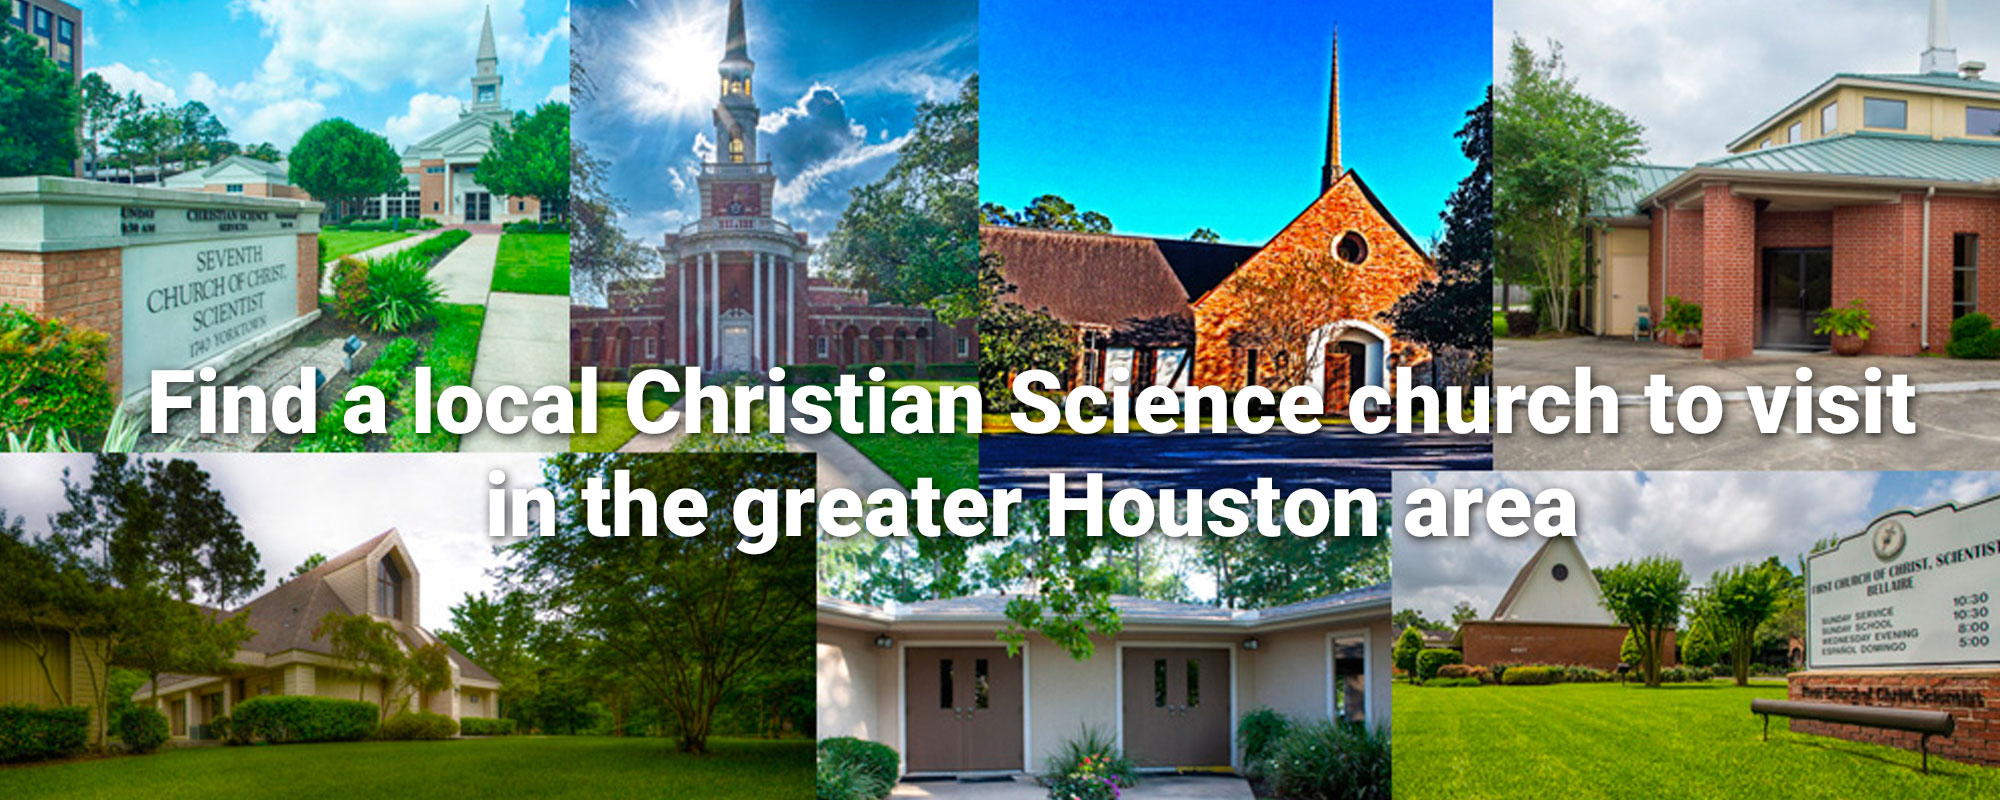 Find a local Christian Science church to visit in the greater Houston area